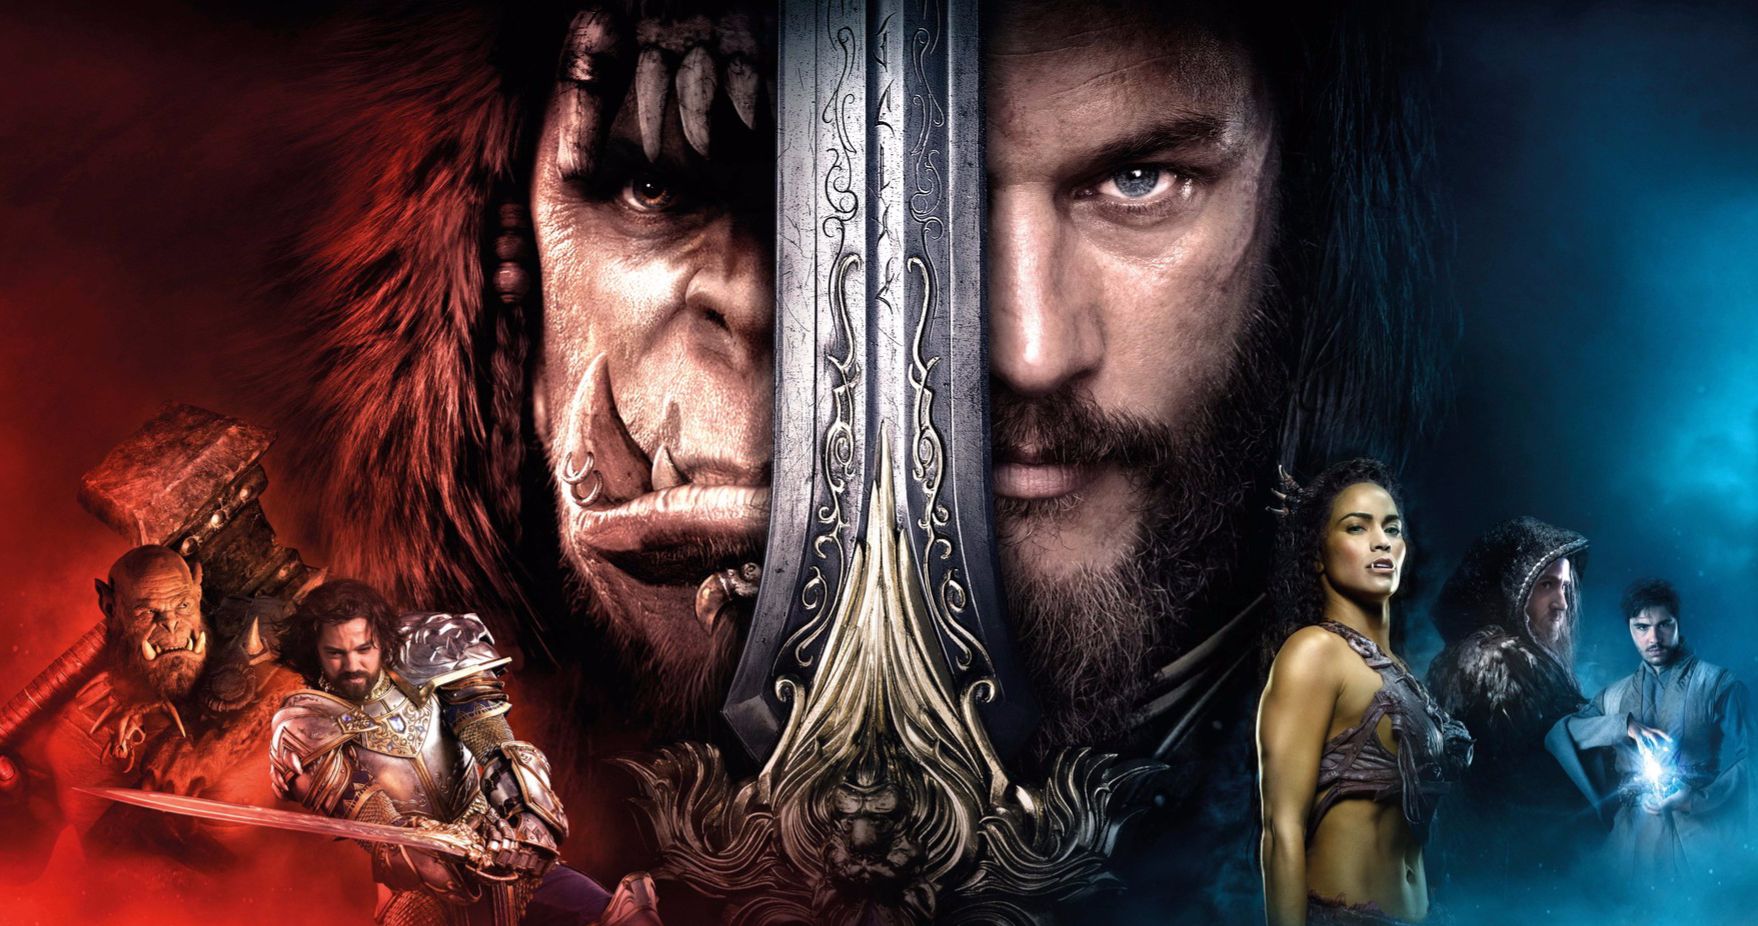 Warcraft 2 Rumored to Be Happening at Legendary